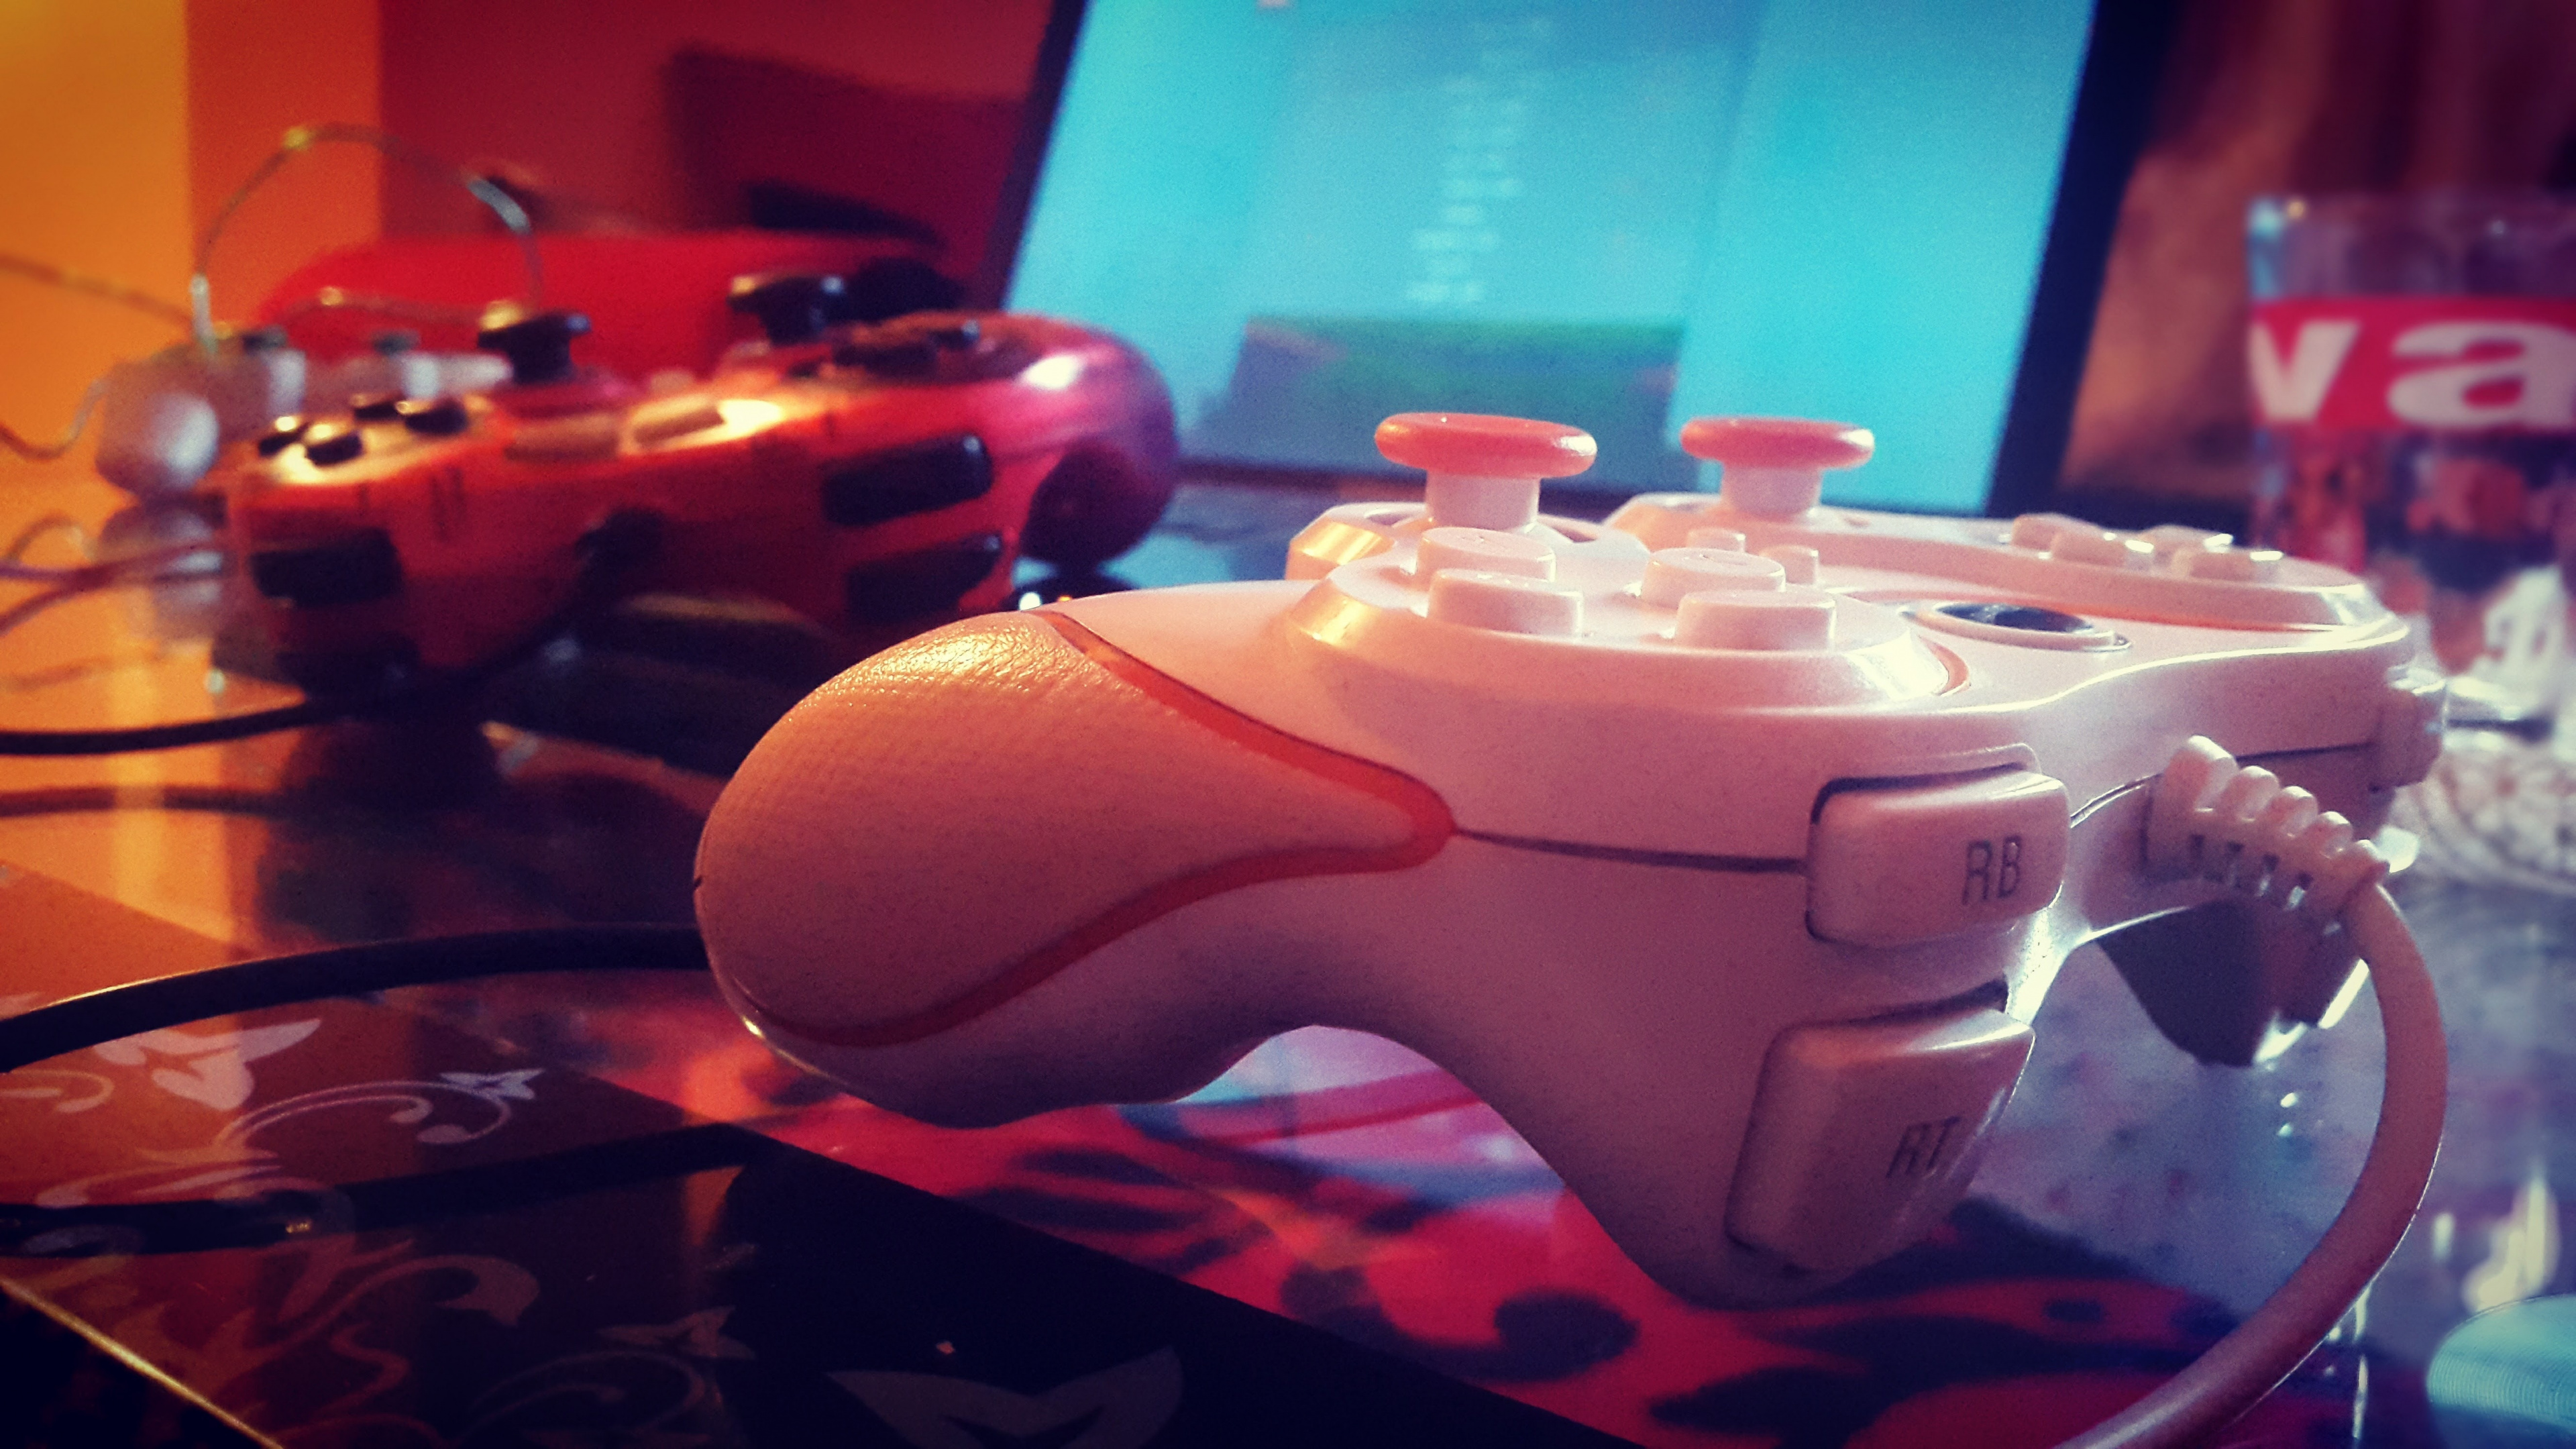 White Game Controller on Brown Wooden Table. Wallpaper in 3840x2160 Resolution